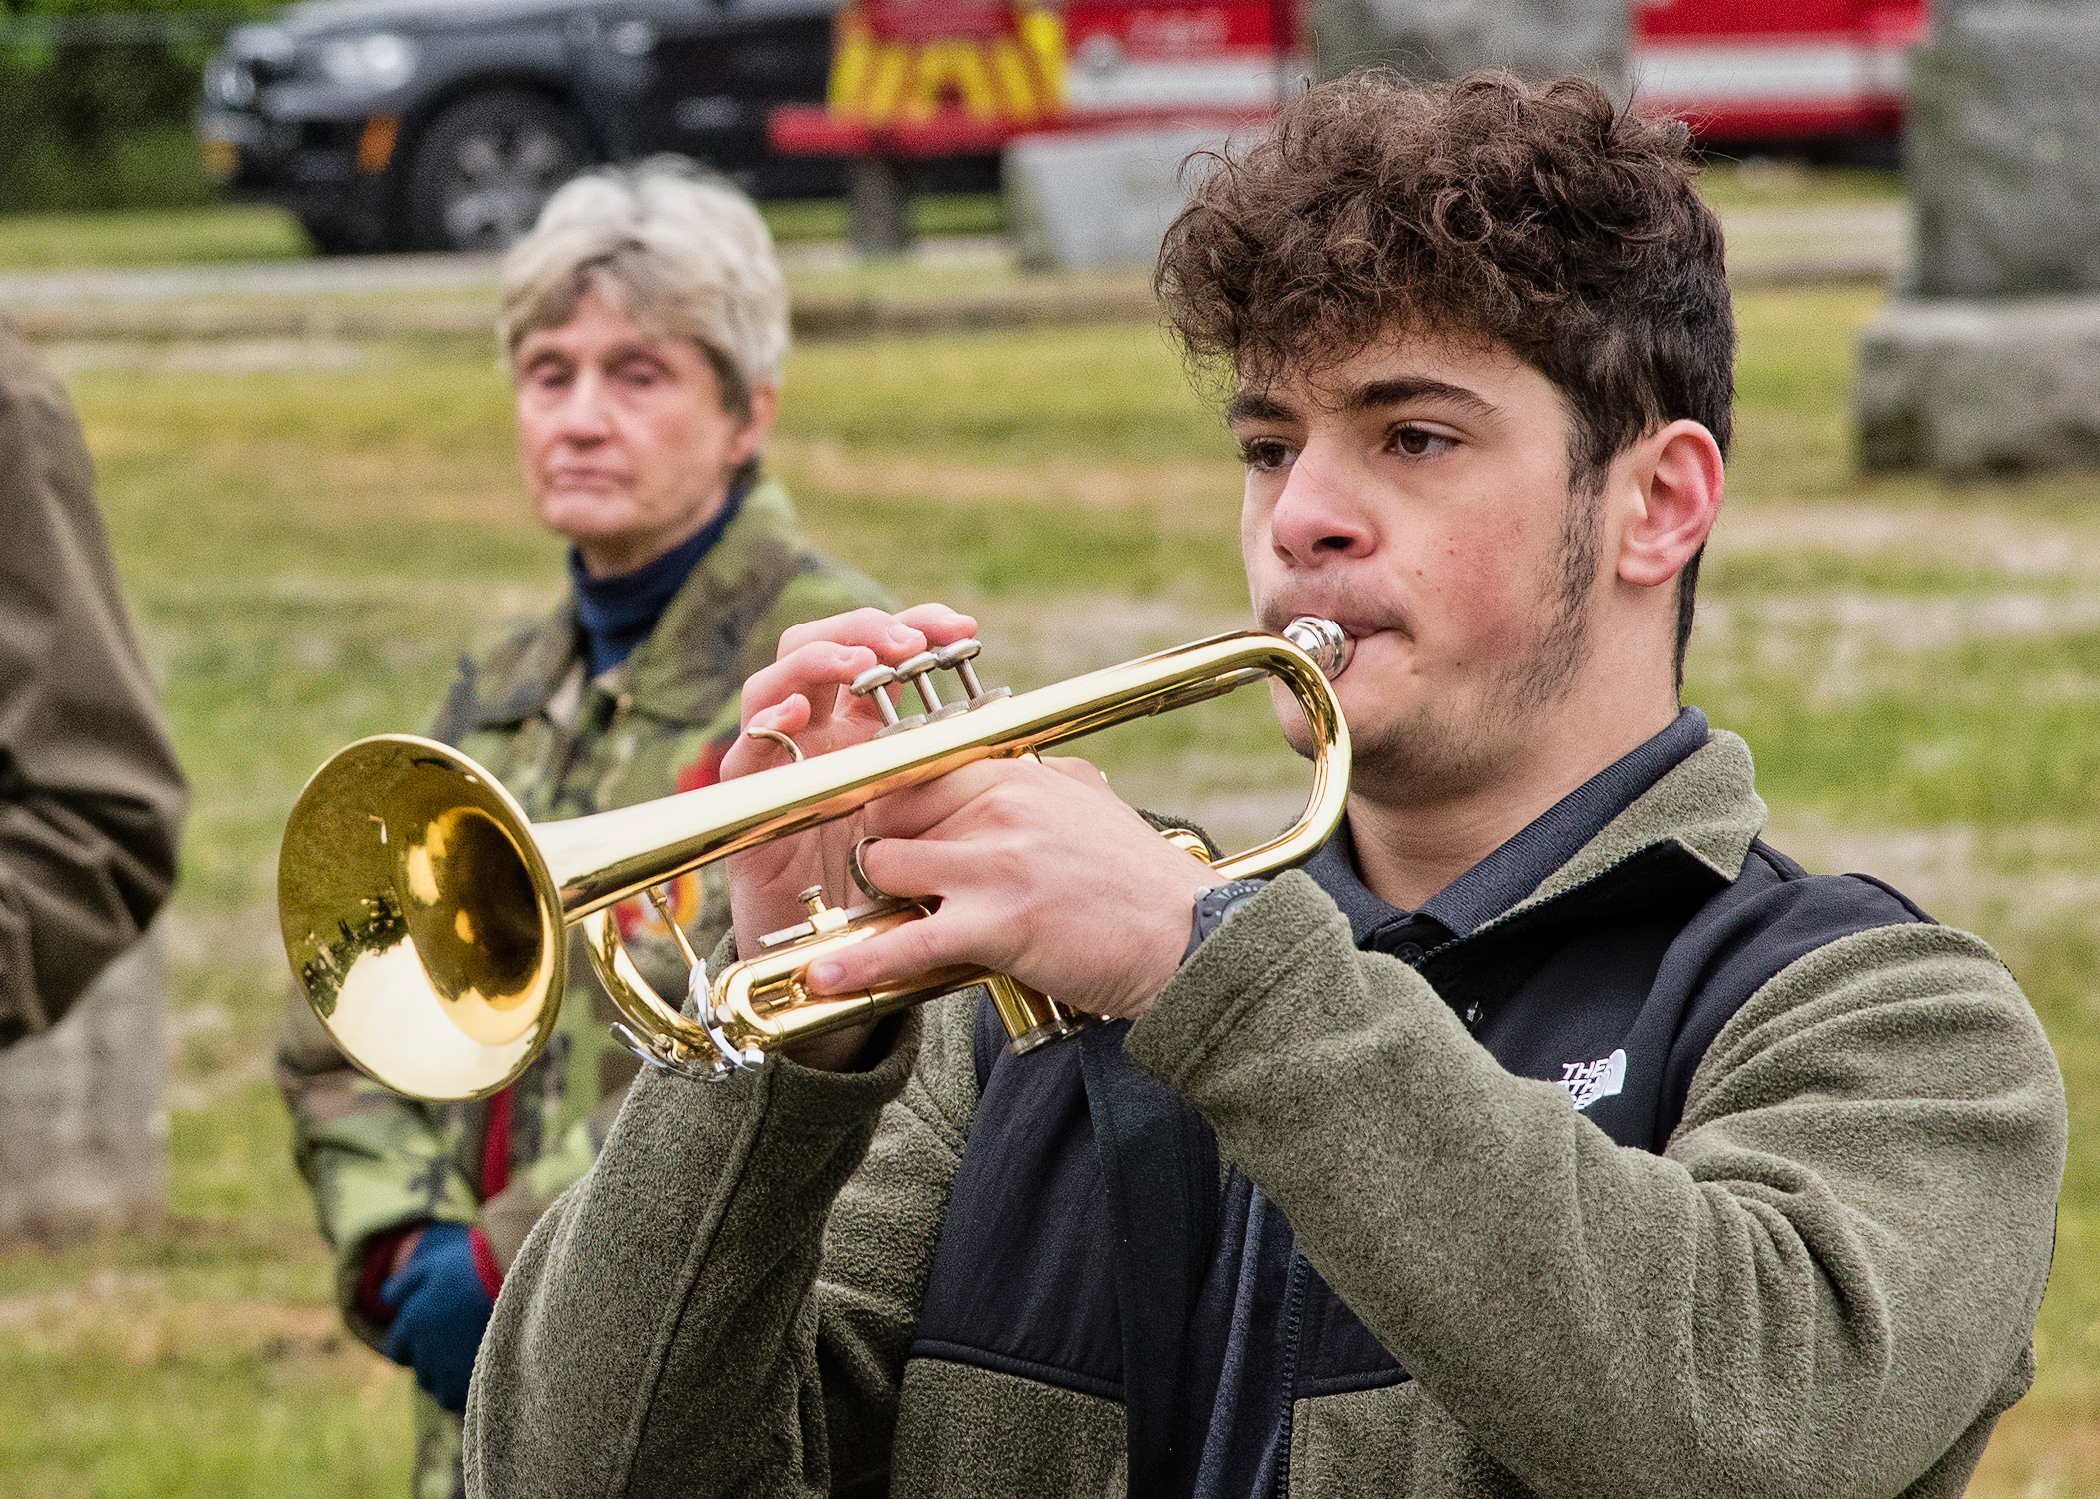 Westhampton Beach High School student Joseph D’Agostino played “Taps” at the Westhampton ceremony. COURTESY WESTHAMPTON BEACH FIRE DEPARTMENT